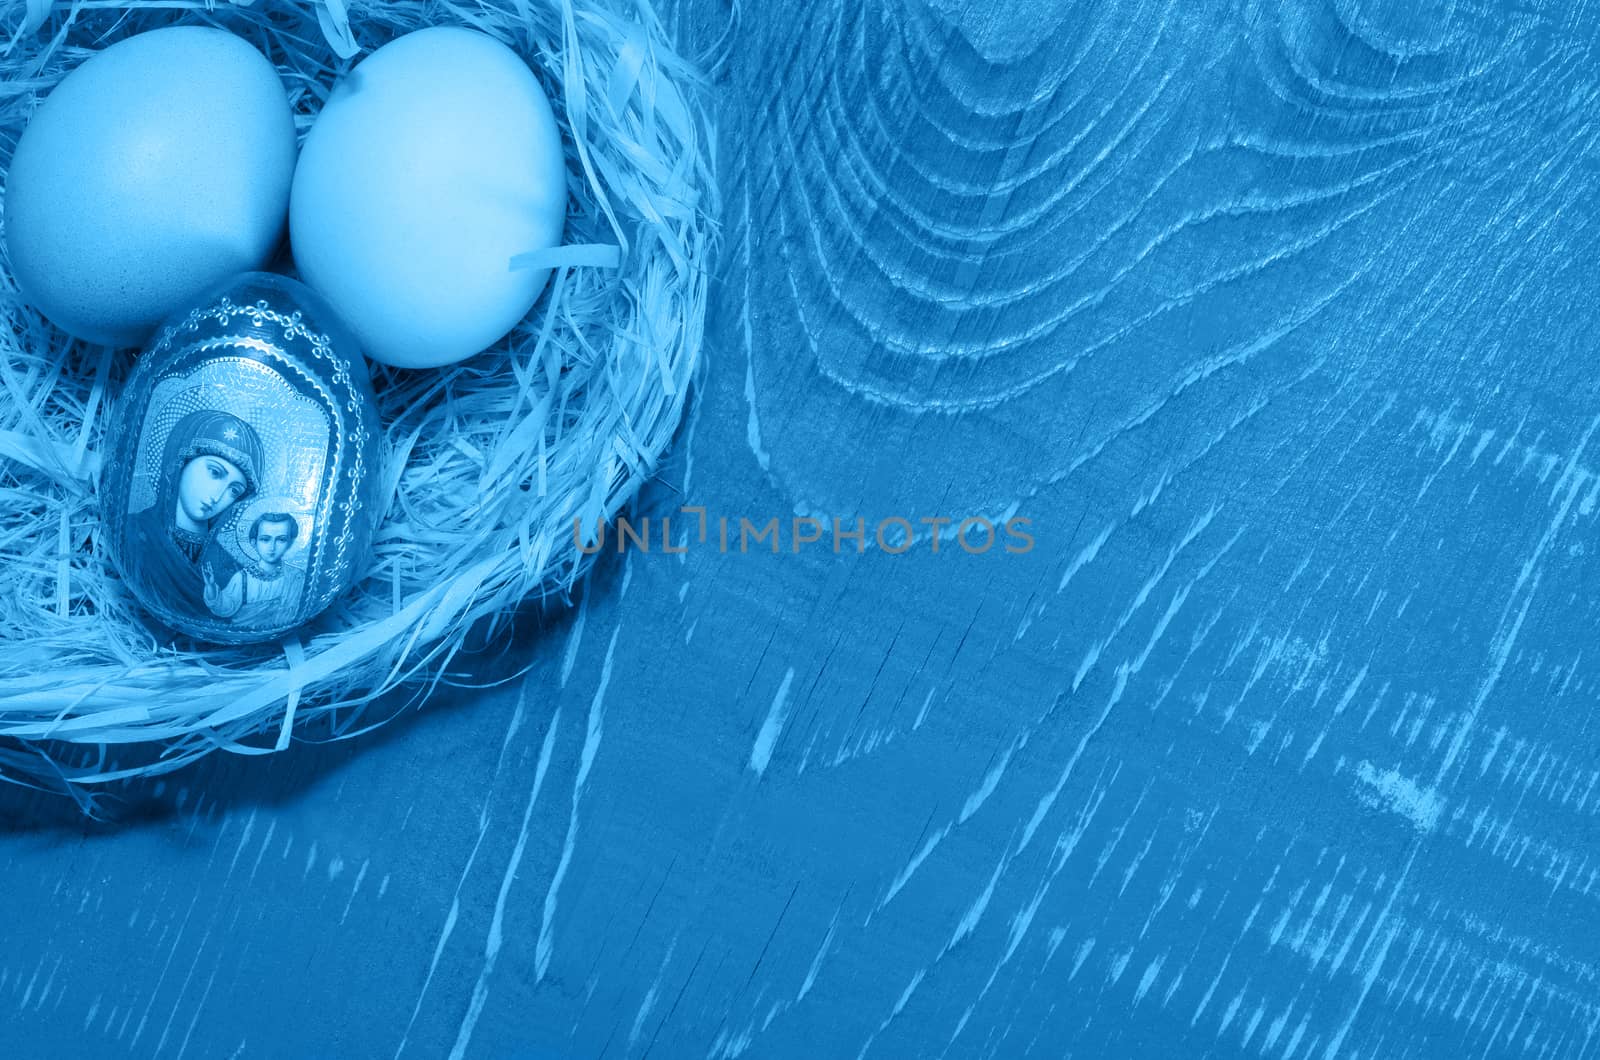 Eggs in the nest of bark, lying on a wooden background toned in blue color. On the Board, place for text.